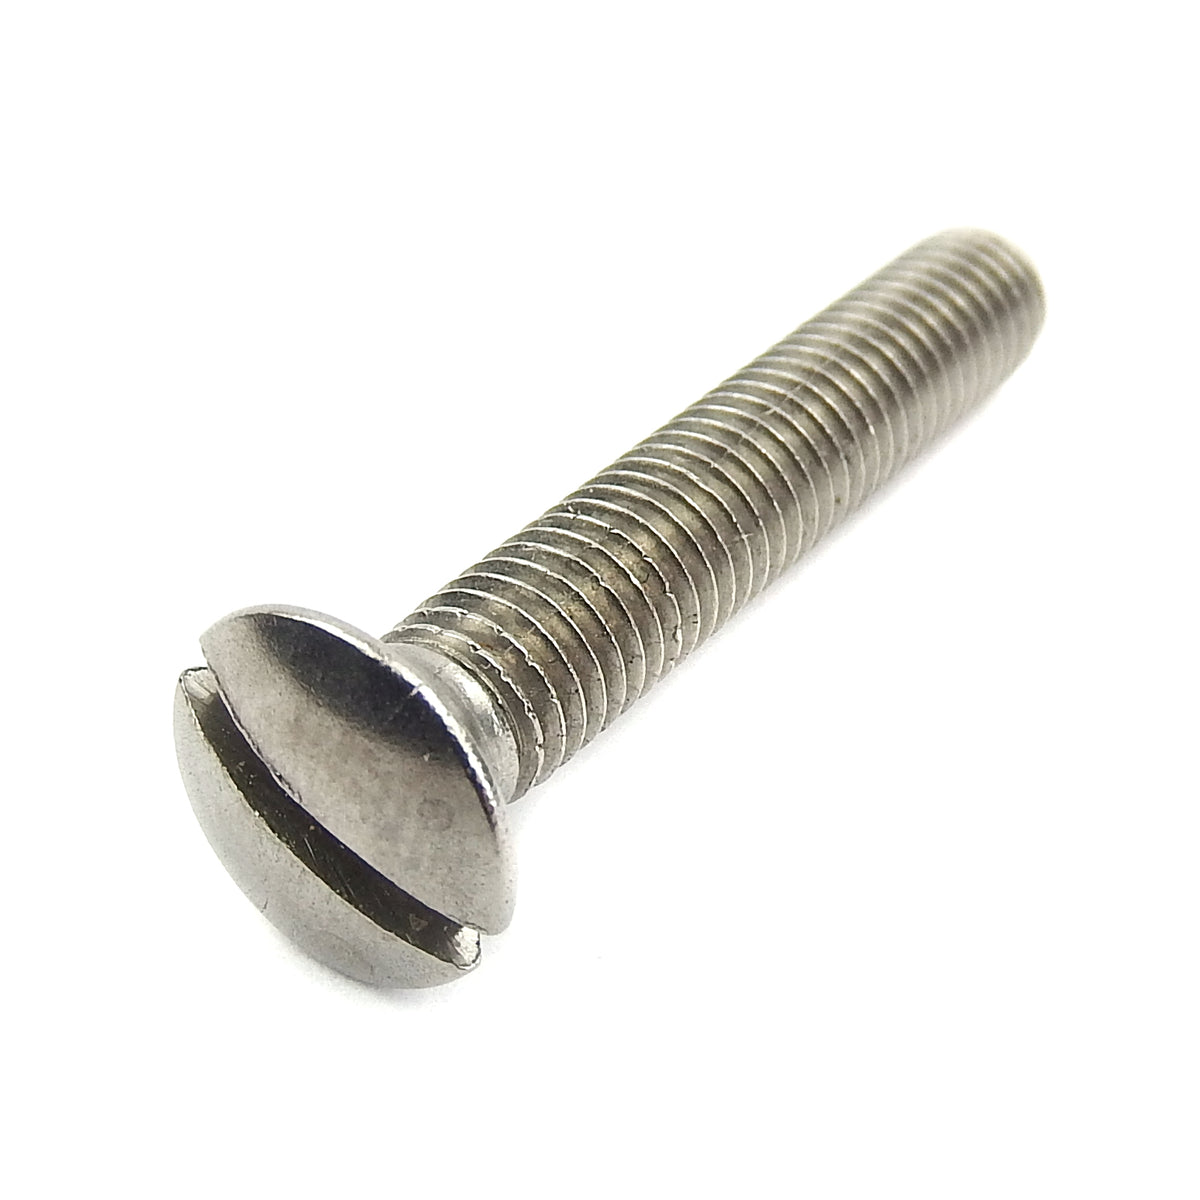 Counter Sunk Raised Screw M6 x 20mm Stainless